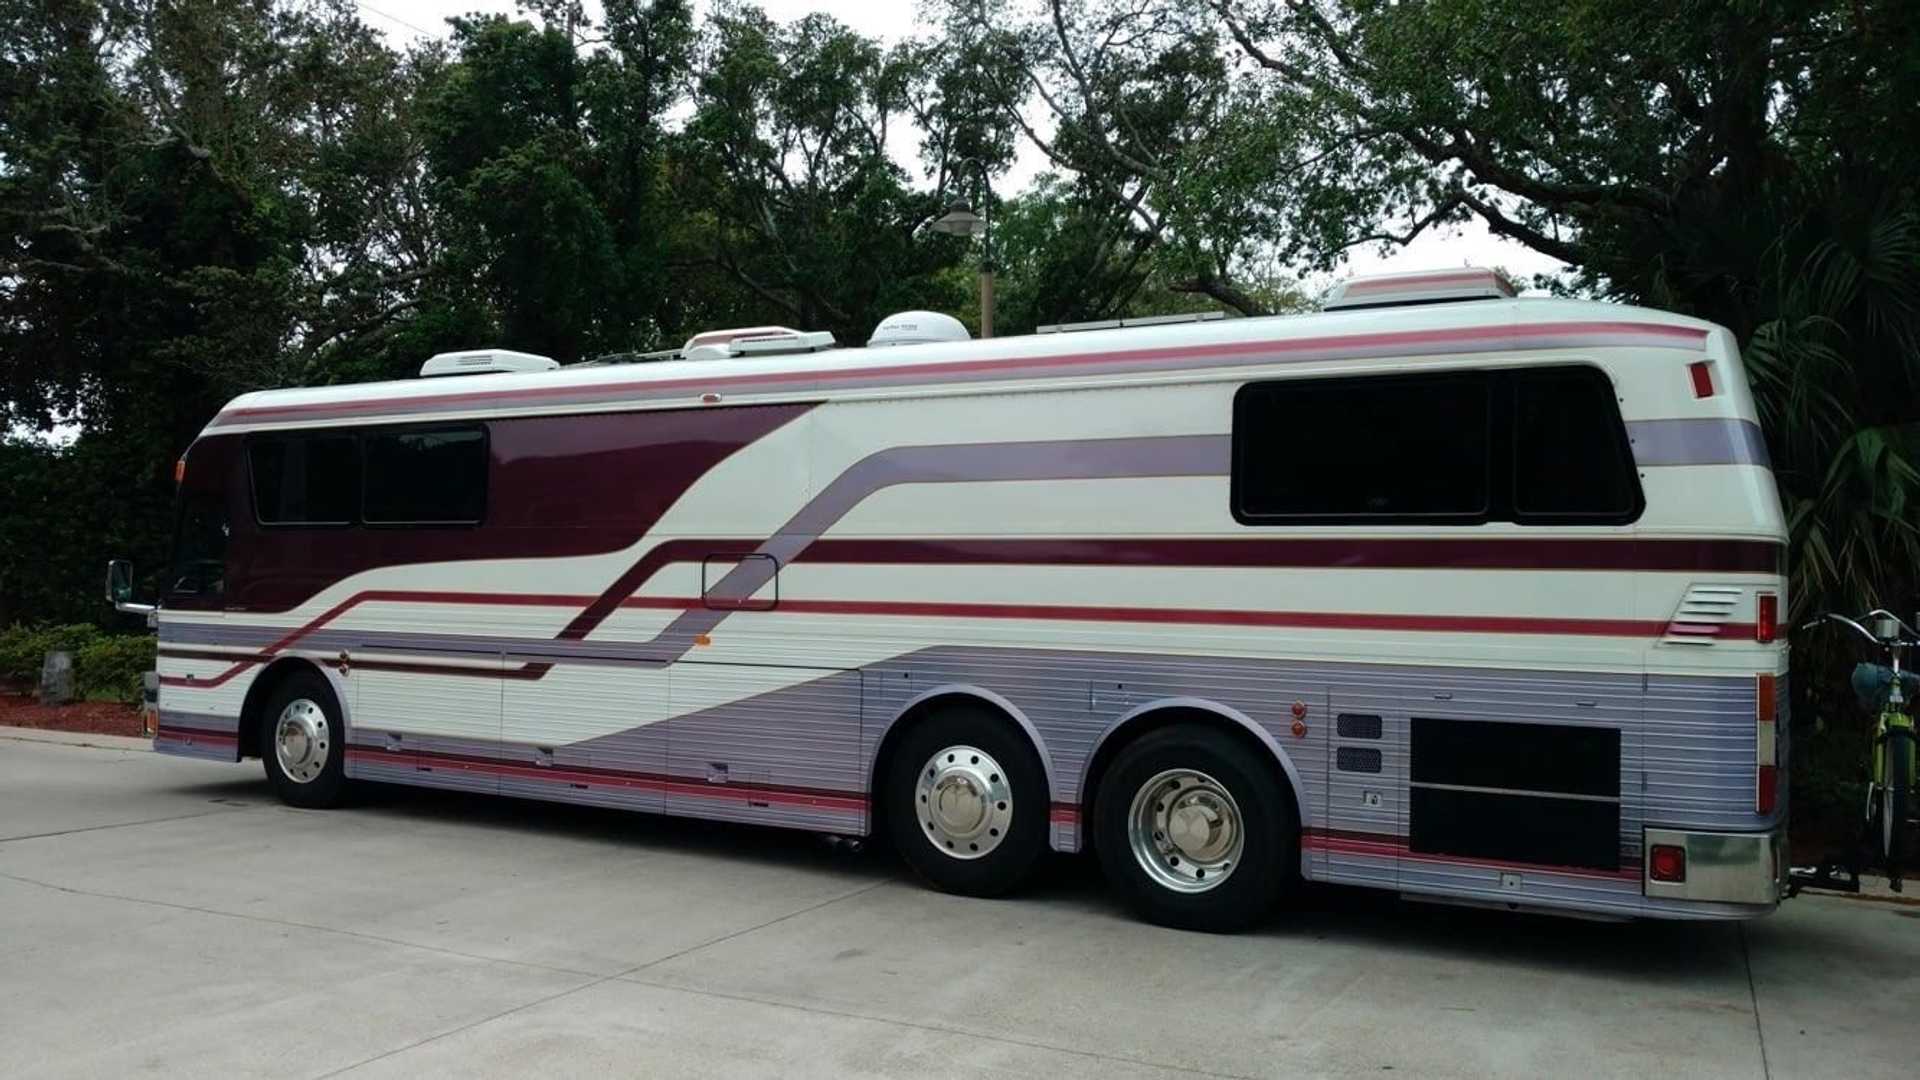 1983-eagle-model-10-motorcoach-owned-by-prince (3)